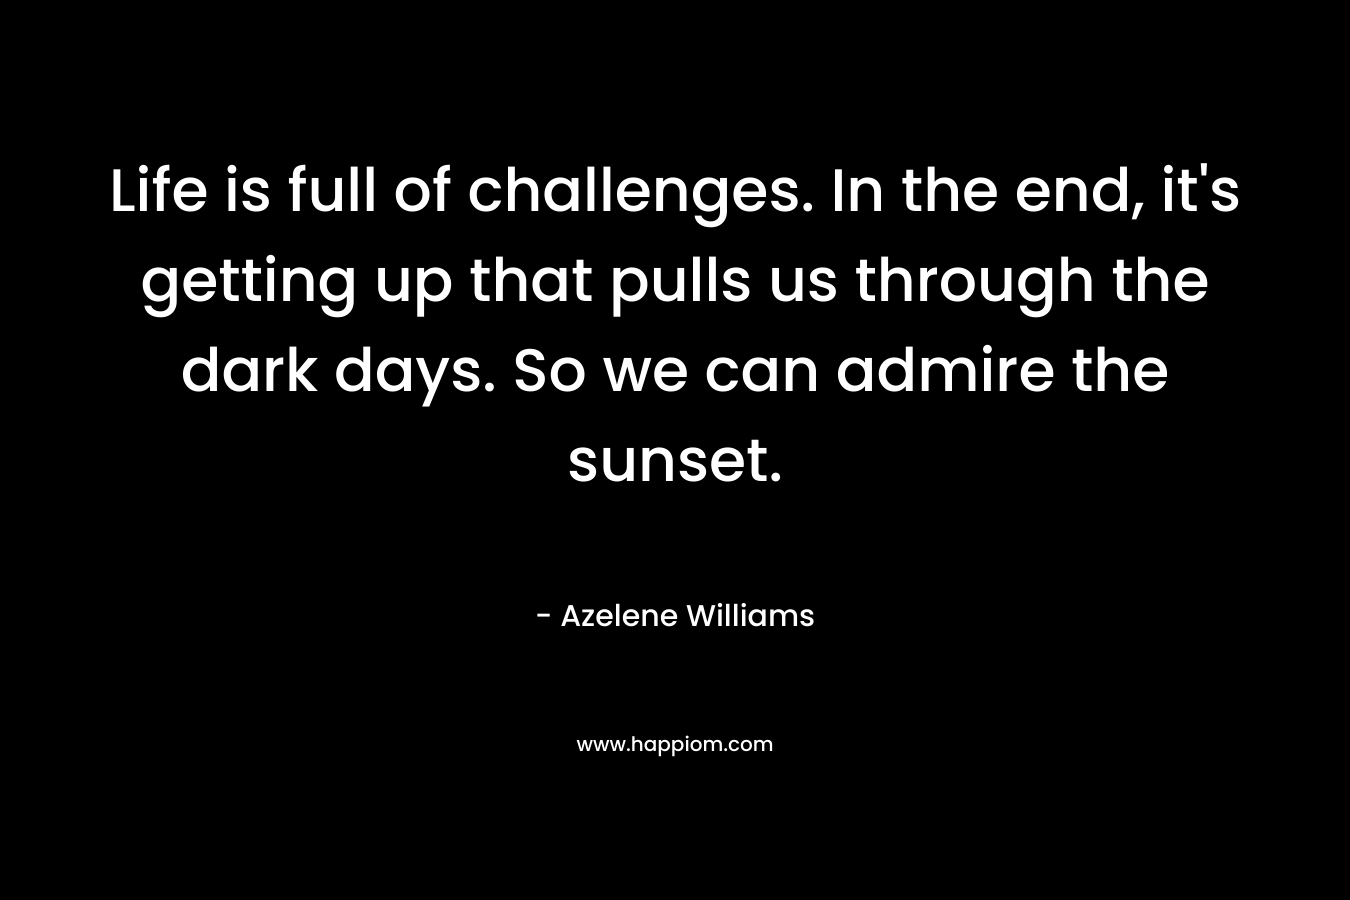 Life is full of challenges. In the end, it’s getting up that pulls us through the dark days. So we can admire the sunset. – Azelene Williams